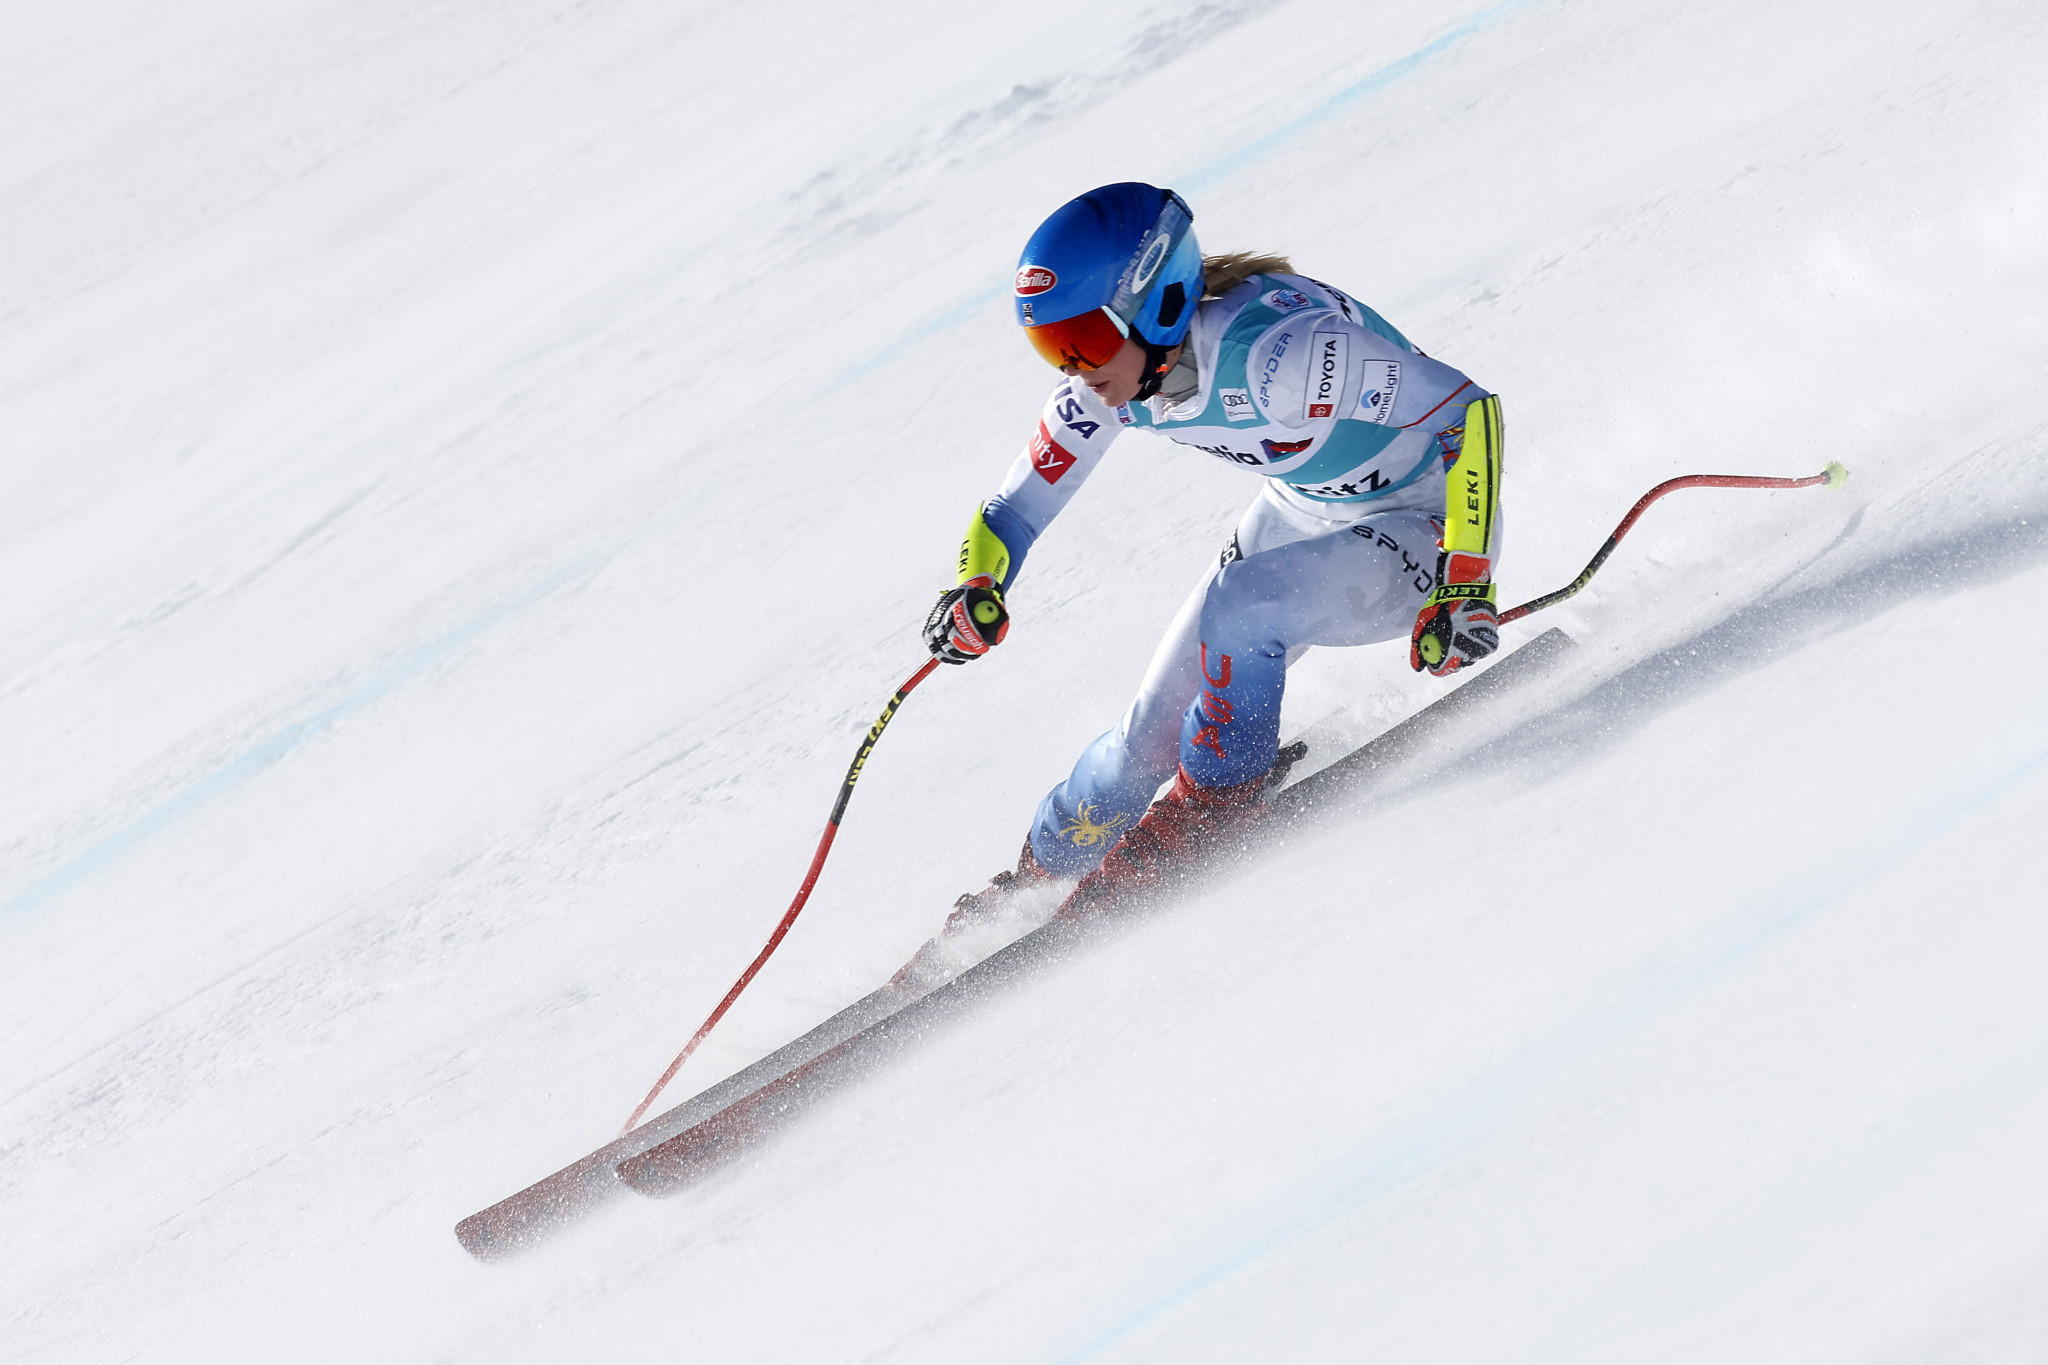 Mikaela Shiffrin is the overall World Cup leader, but will ski only in the super-G race in Val d'Isère ©Getty Images